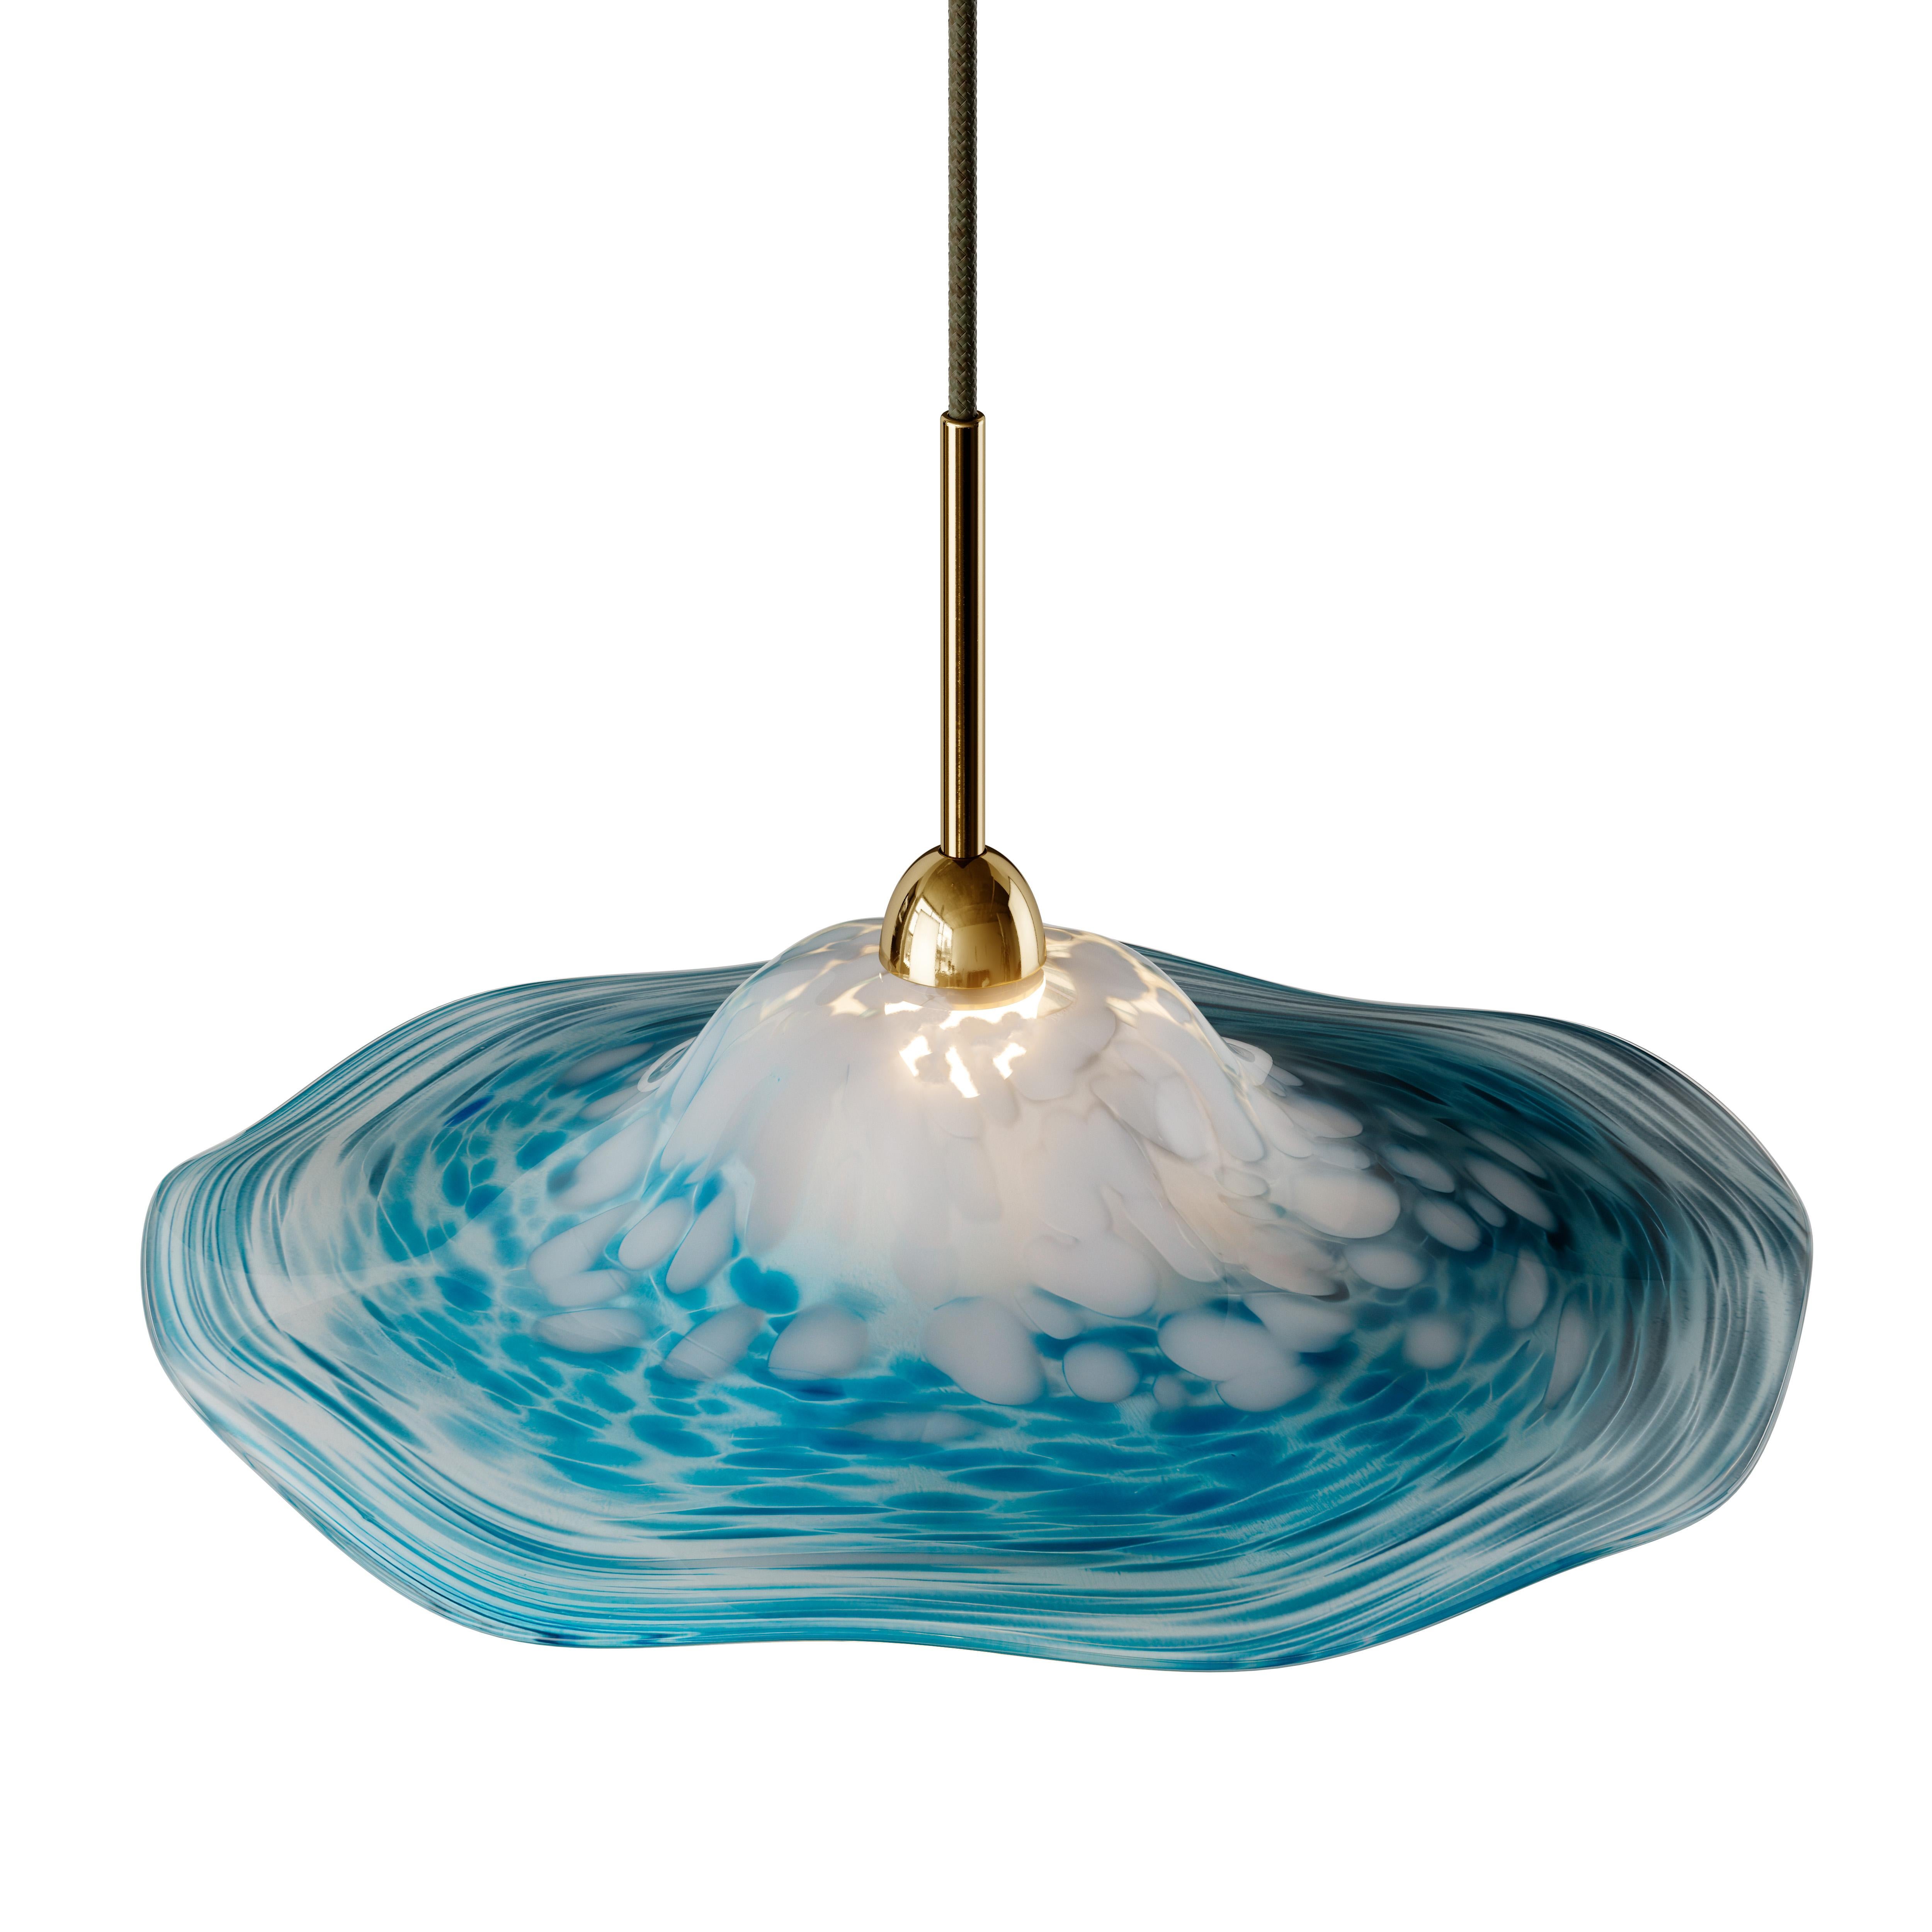 Perla takes inspiration from the oyster, with the distinctive, organic form of the decorative hand spun glass shade representing the shell, with the central light source acting as the pearl. The result is a soft and graceful luminaire that adds a